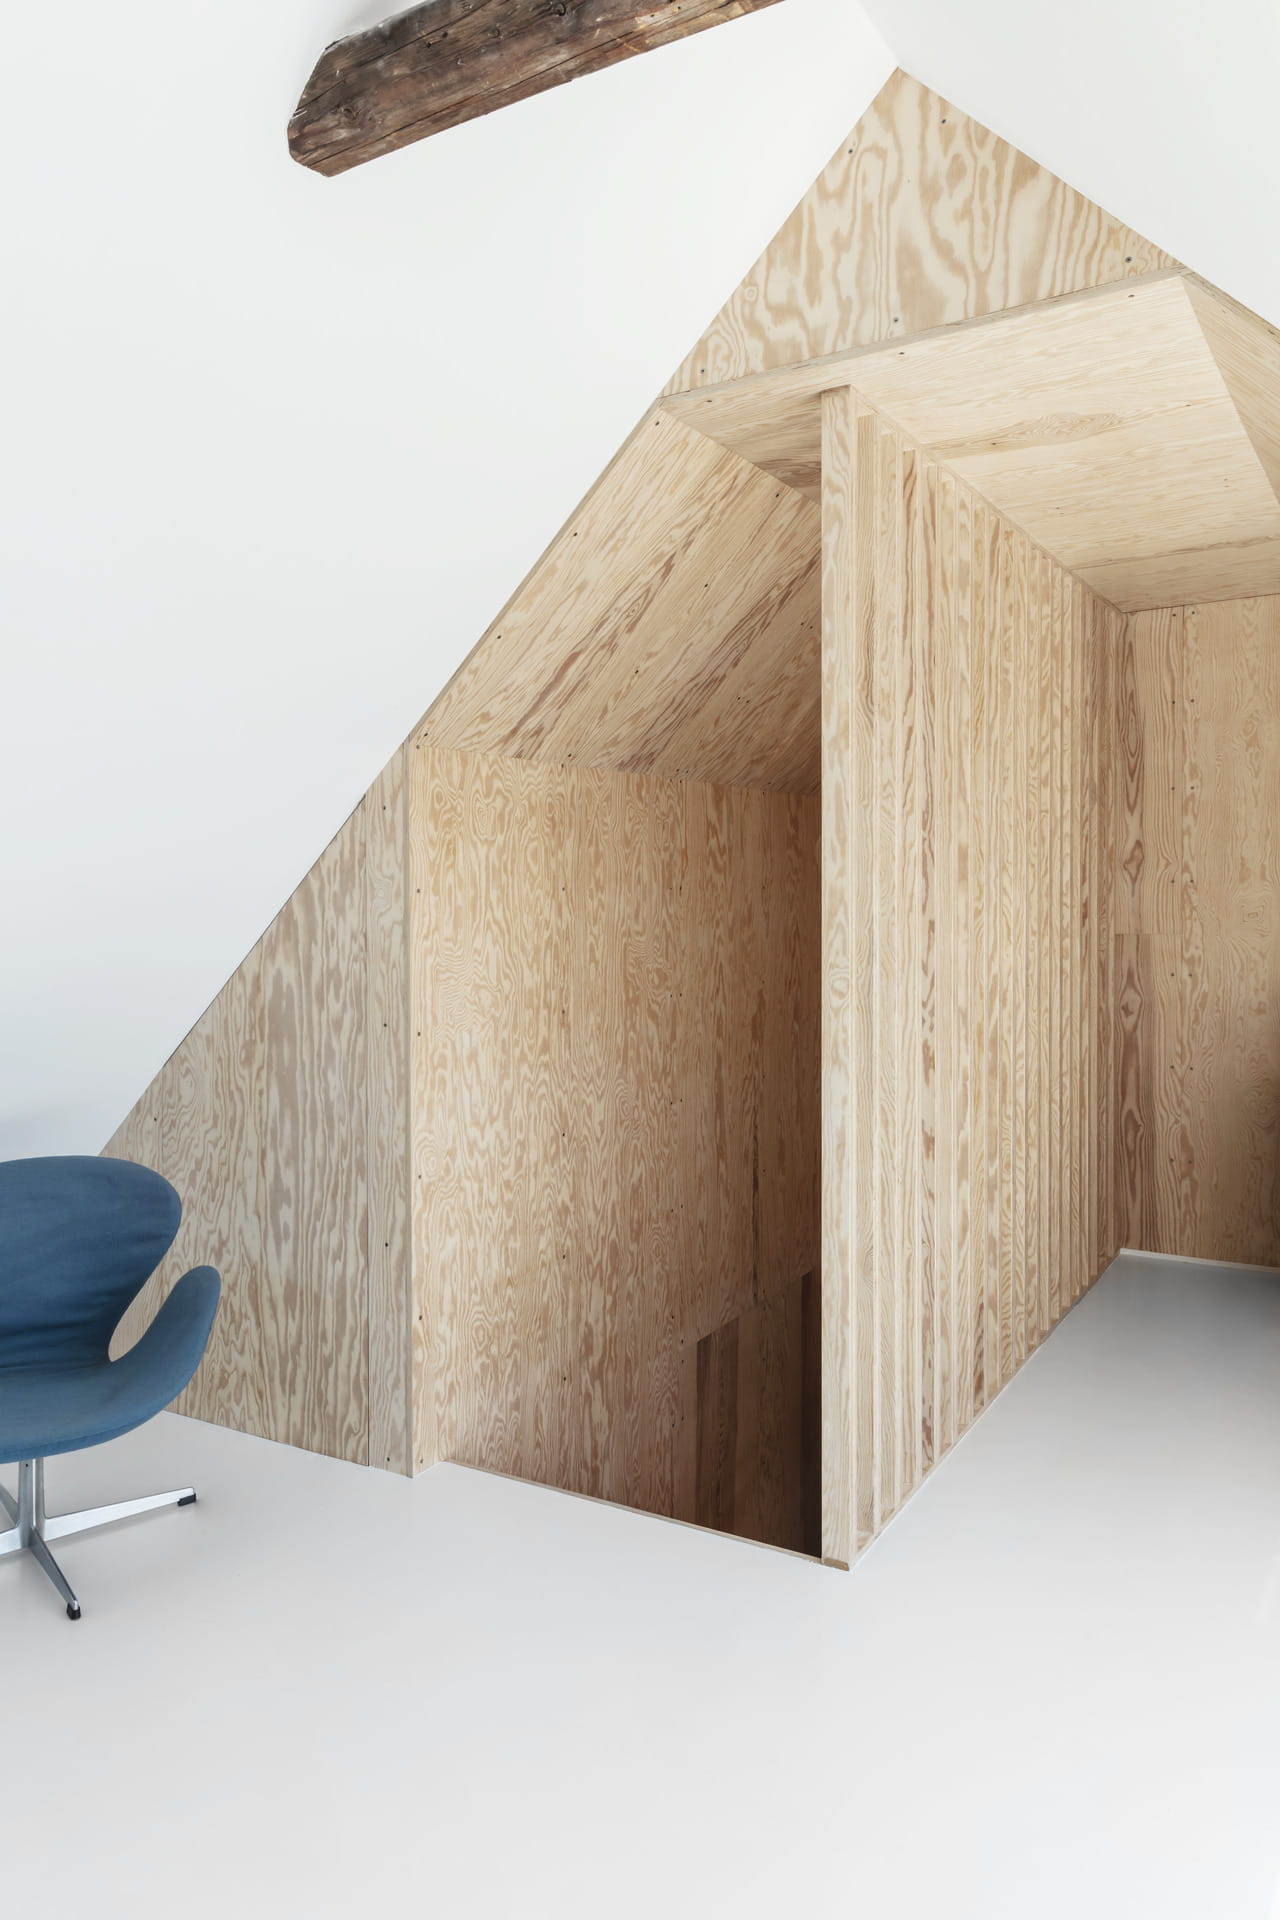 Attic area with wooden walls,